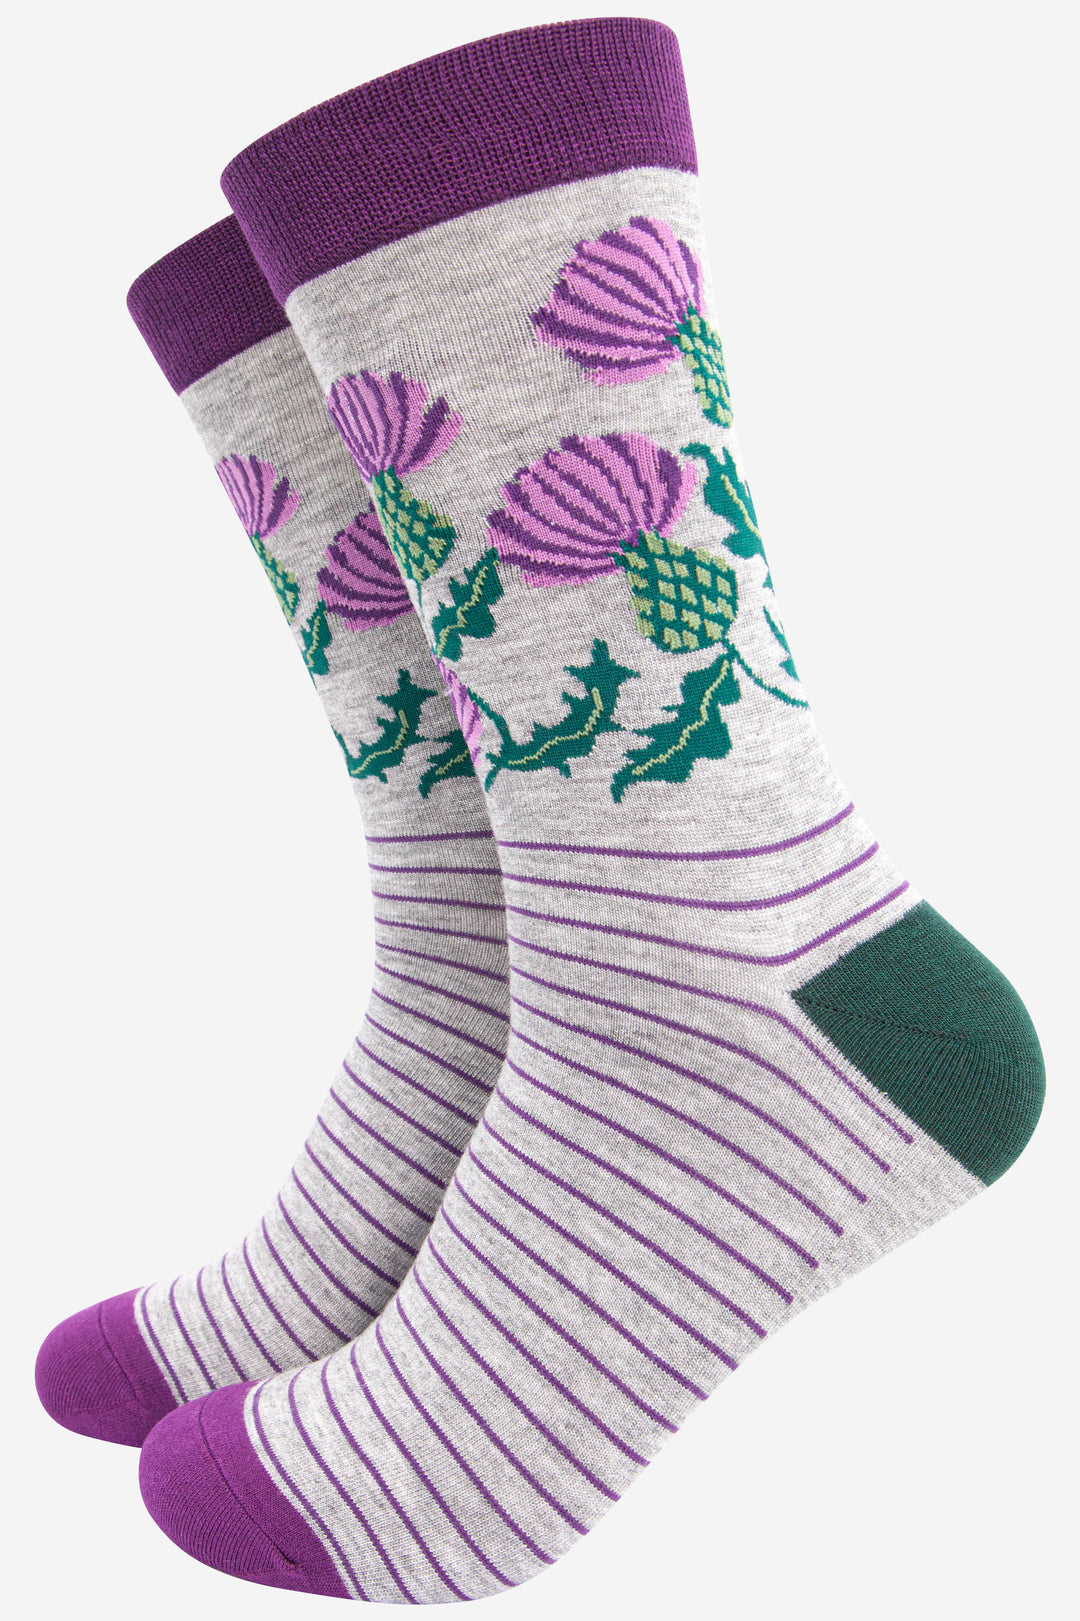 mens grey and purple bamboo socks featings scottish thistle flowers and stripes